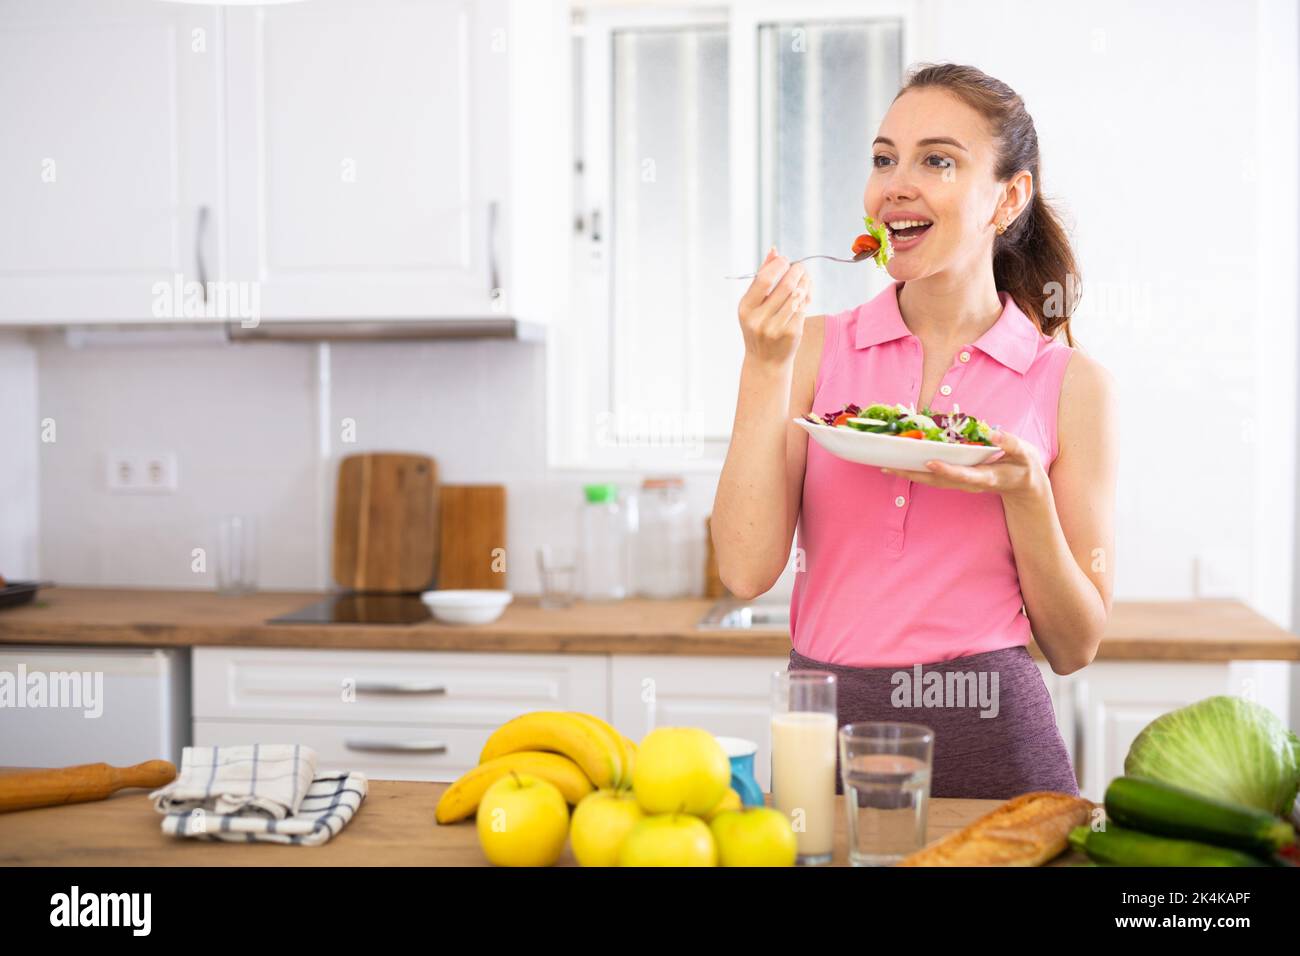 Cheerful woman eating vegetable salad at home Stock Photo